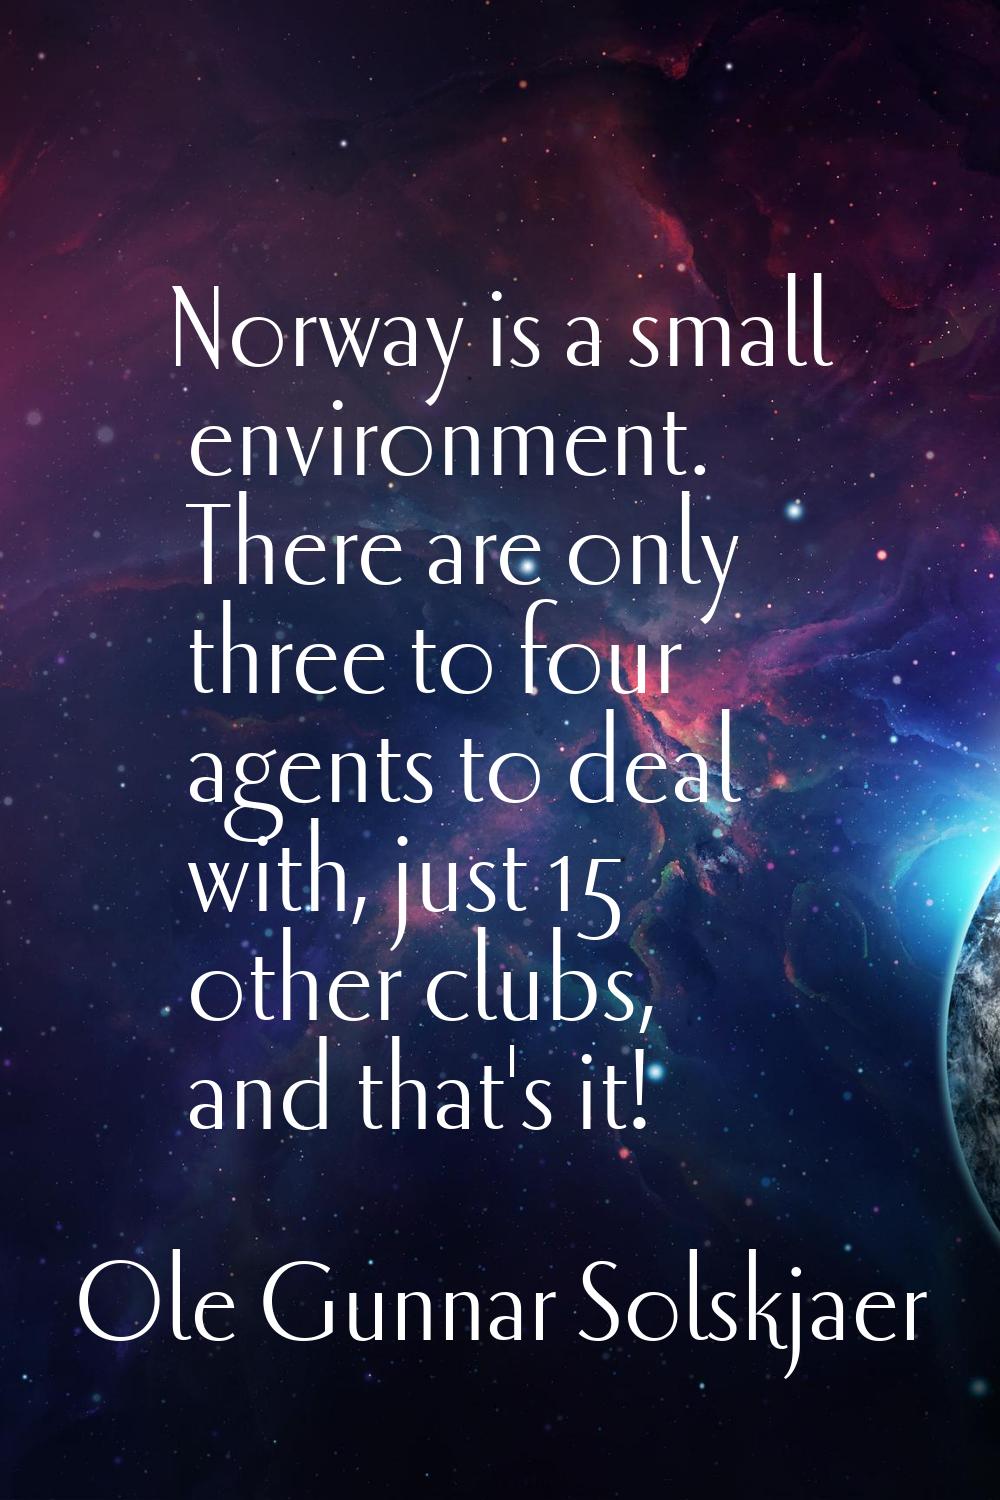 Norway is a small environment. There are only three to four agents to deal with, just 15 other club